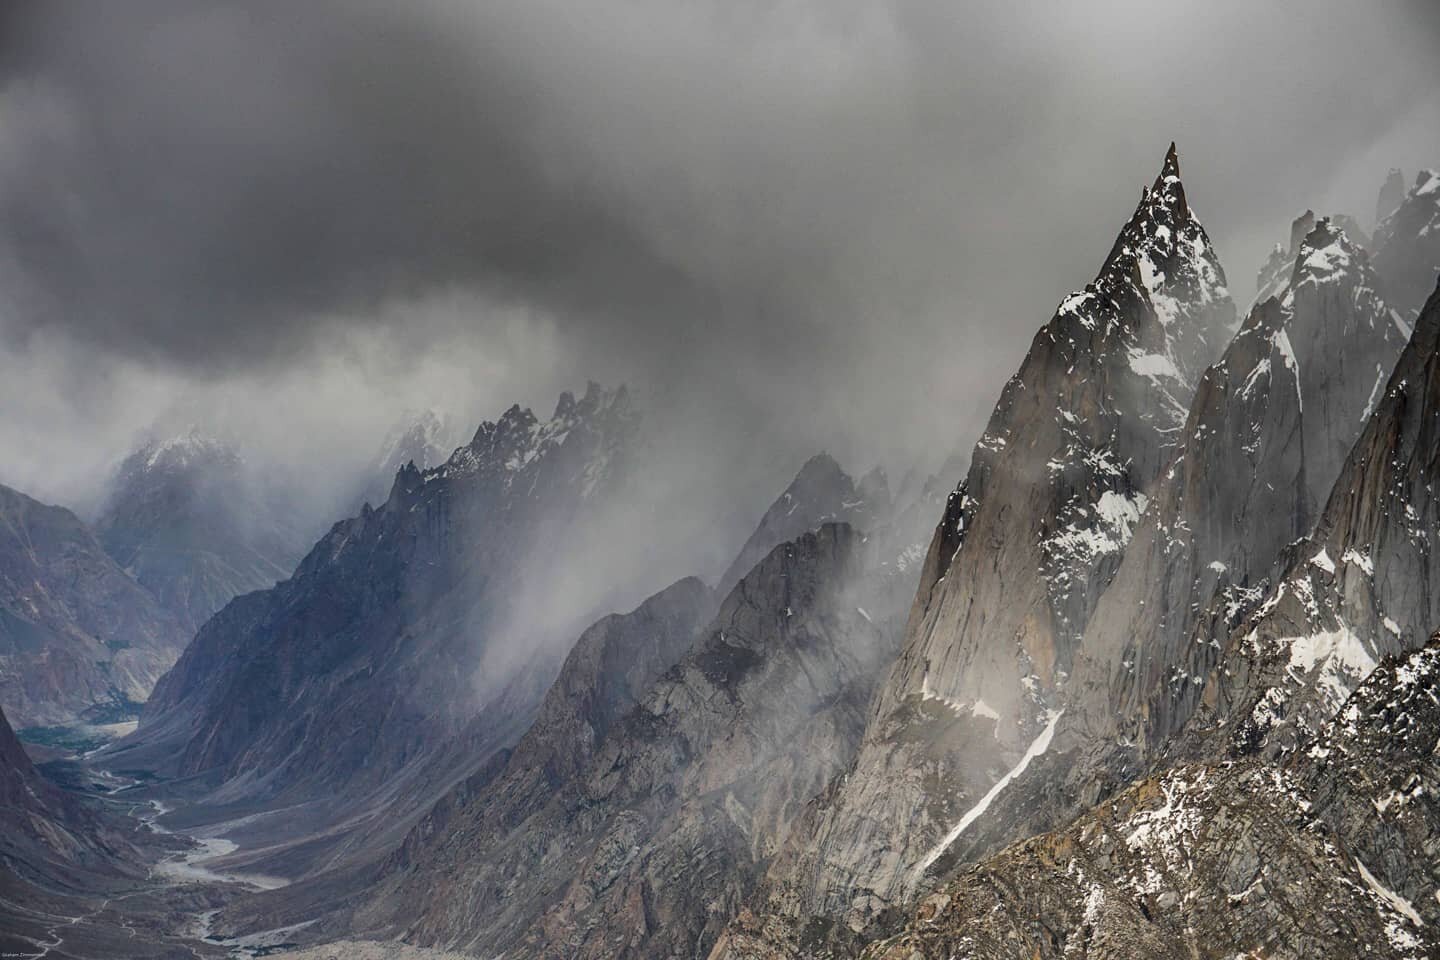 Another excerpt from the @alpinistmag article &quot;Labyrinths of Granite and Ice&quot; about our climb on Link Sar:

&quot;Clouds poured through the sky in an ever-expanding kaleidoscope of grey hues. Rain came and went. Finally acclimated, we were 